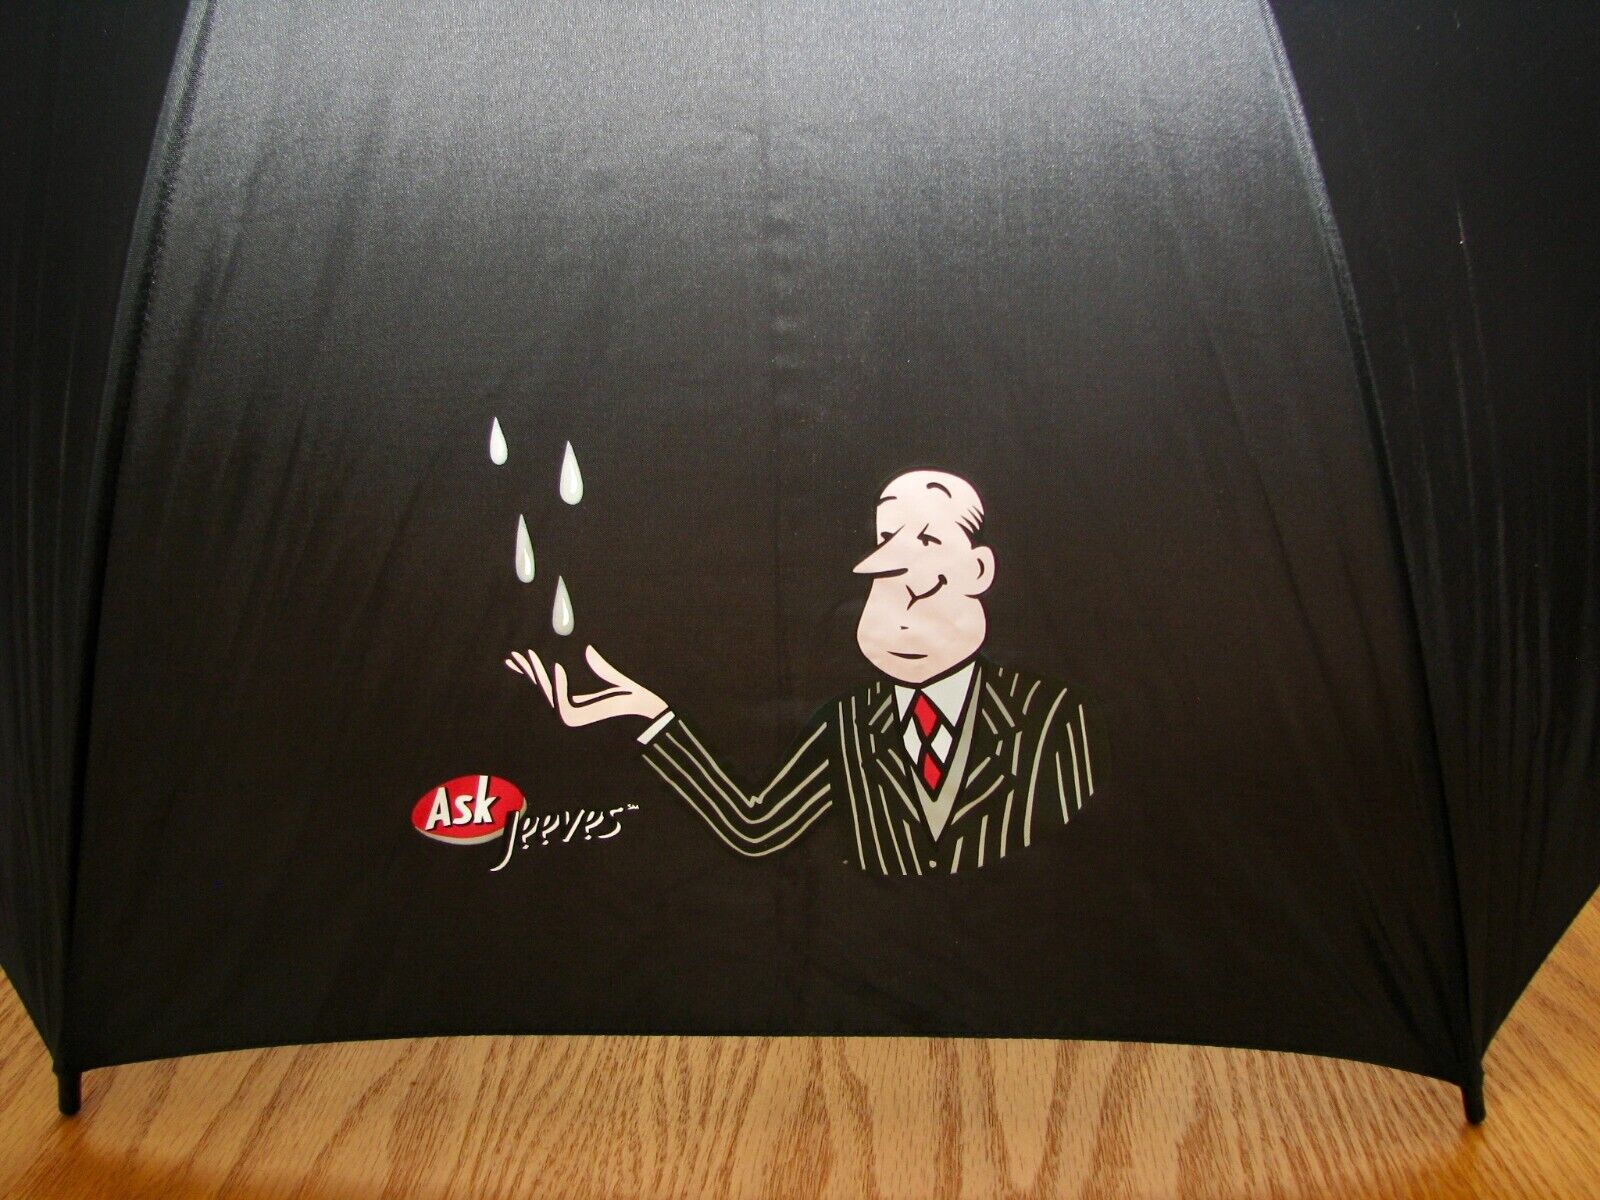 Rare Vintage 1996 Early Internet ASK Jeeves Advertising Promotional Umbrella